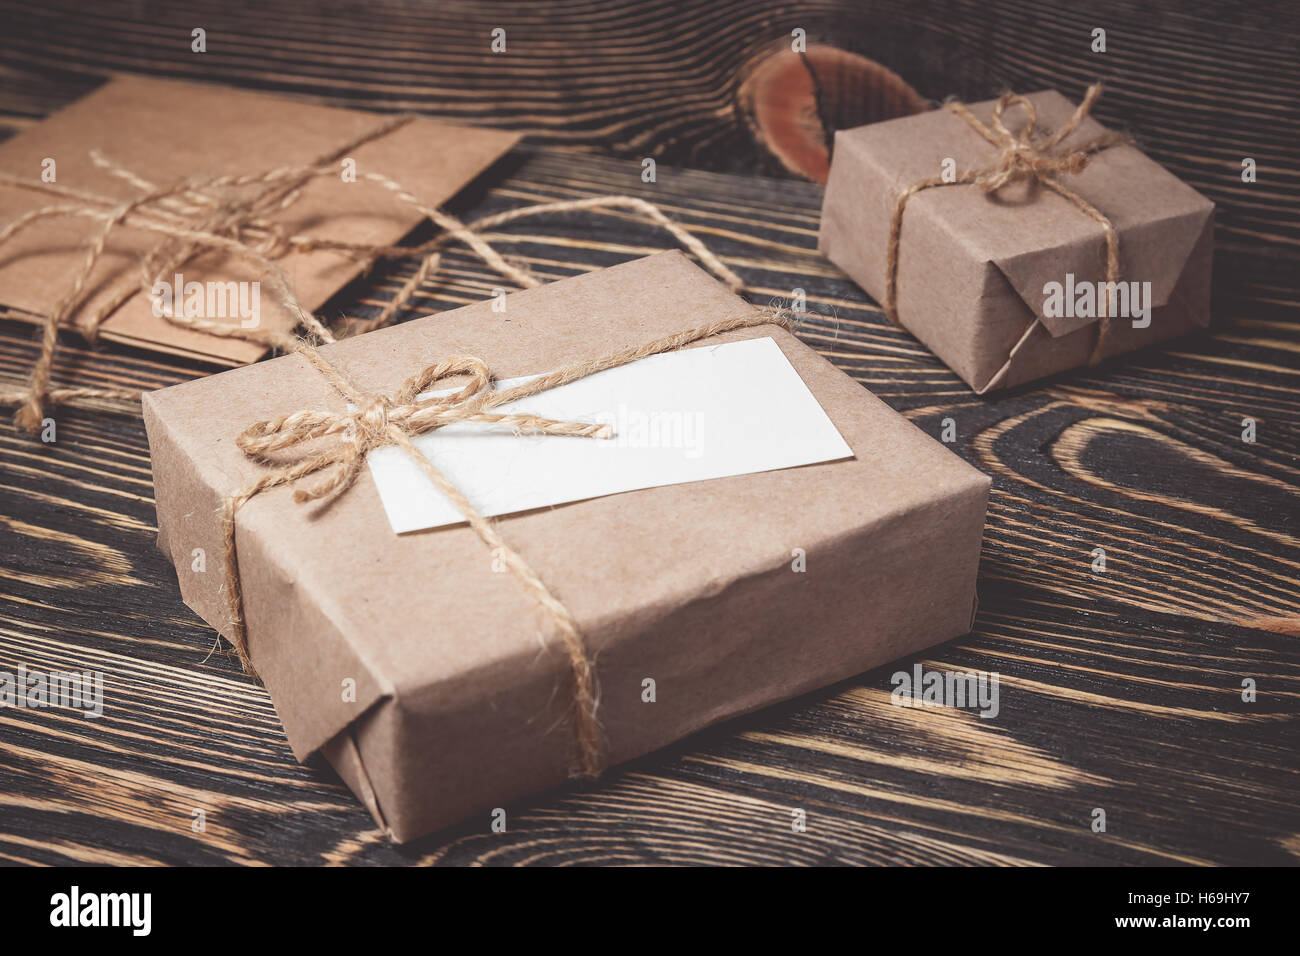 Vintage gift box with blank tag on old wooden background. Stock Photo